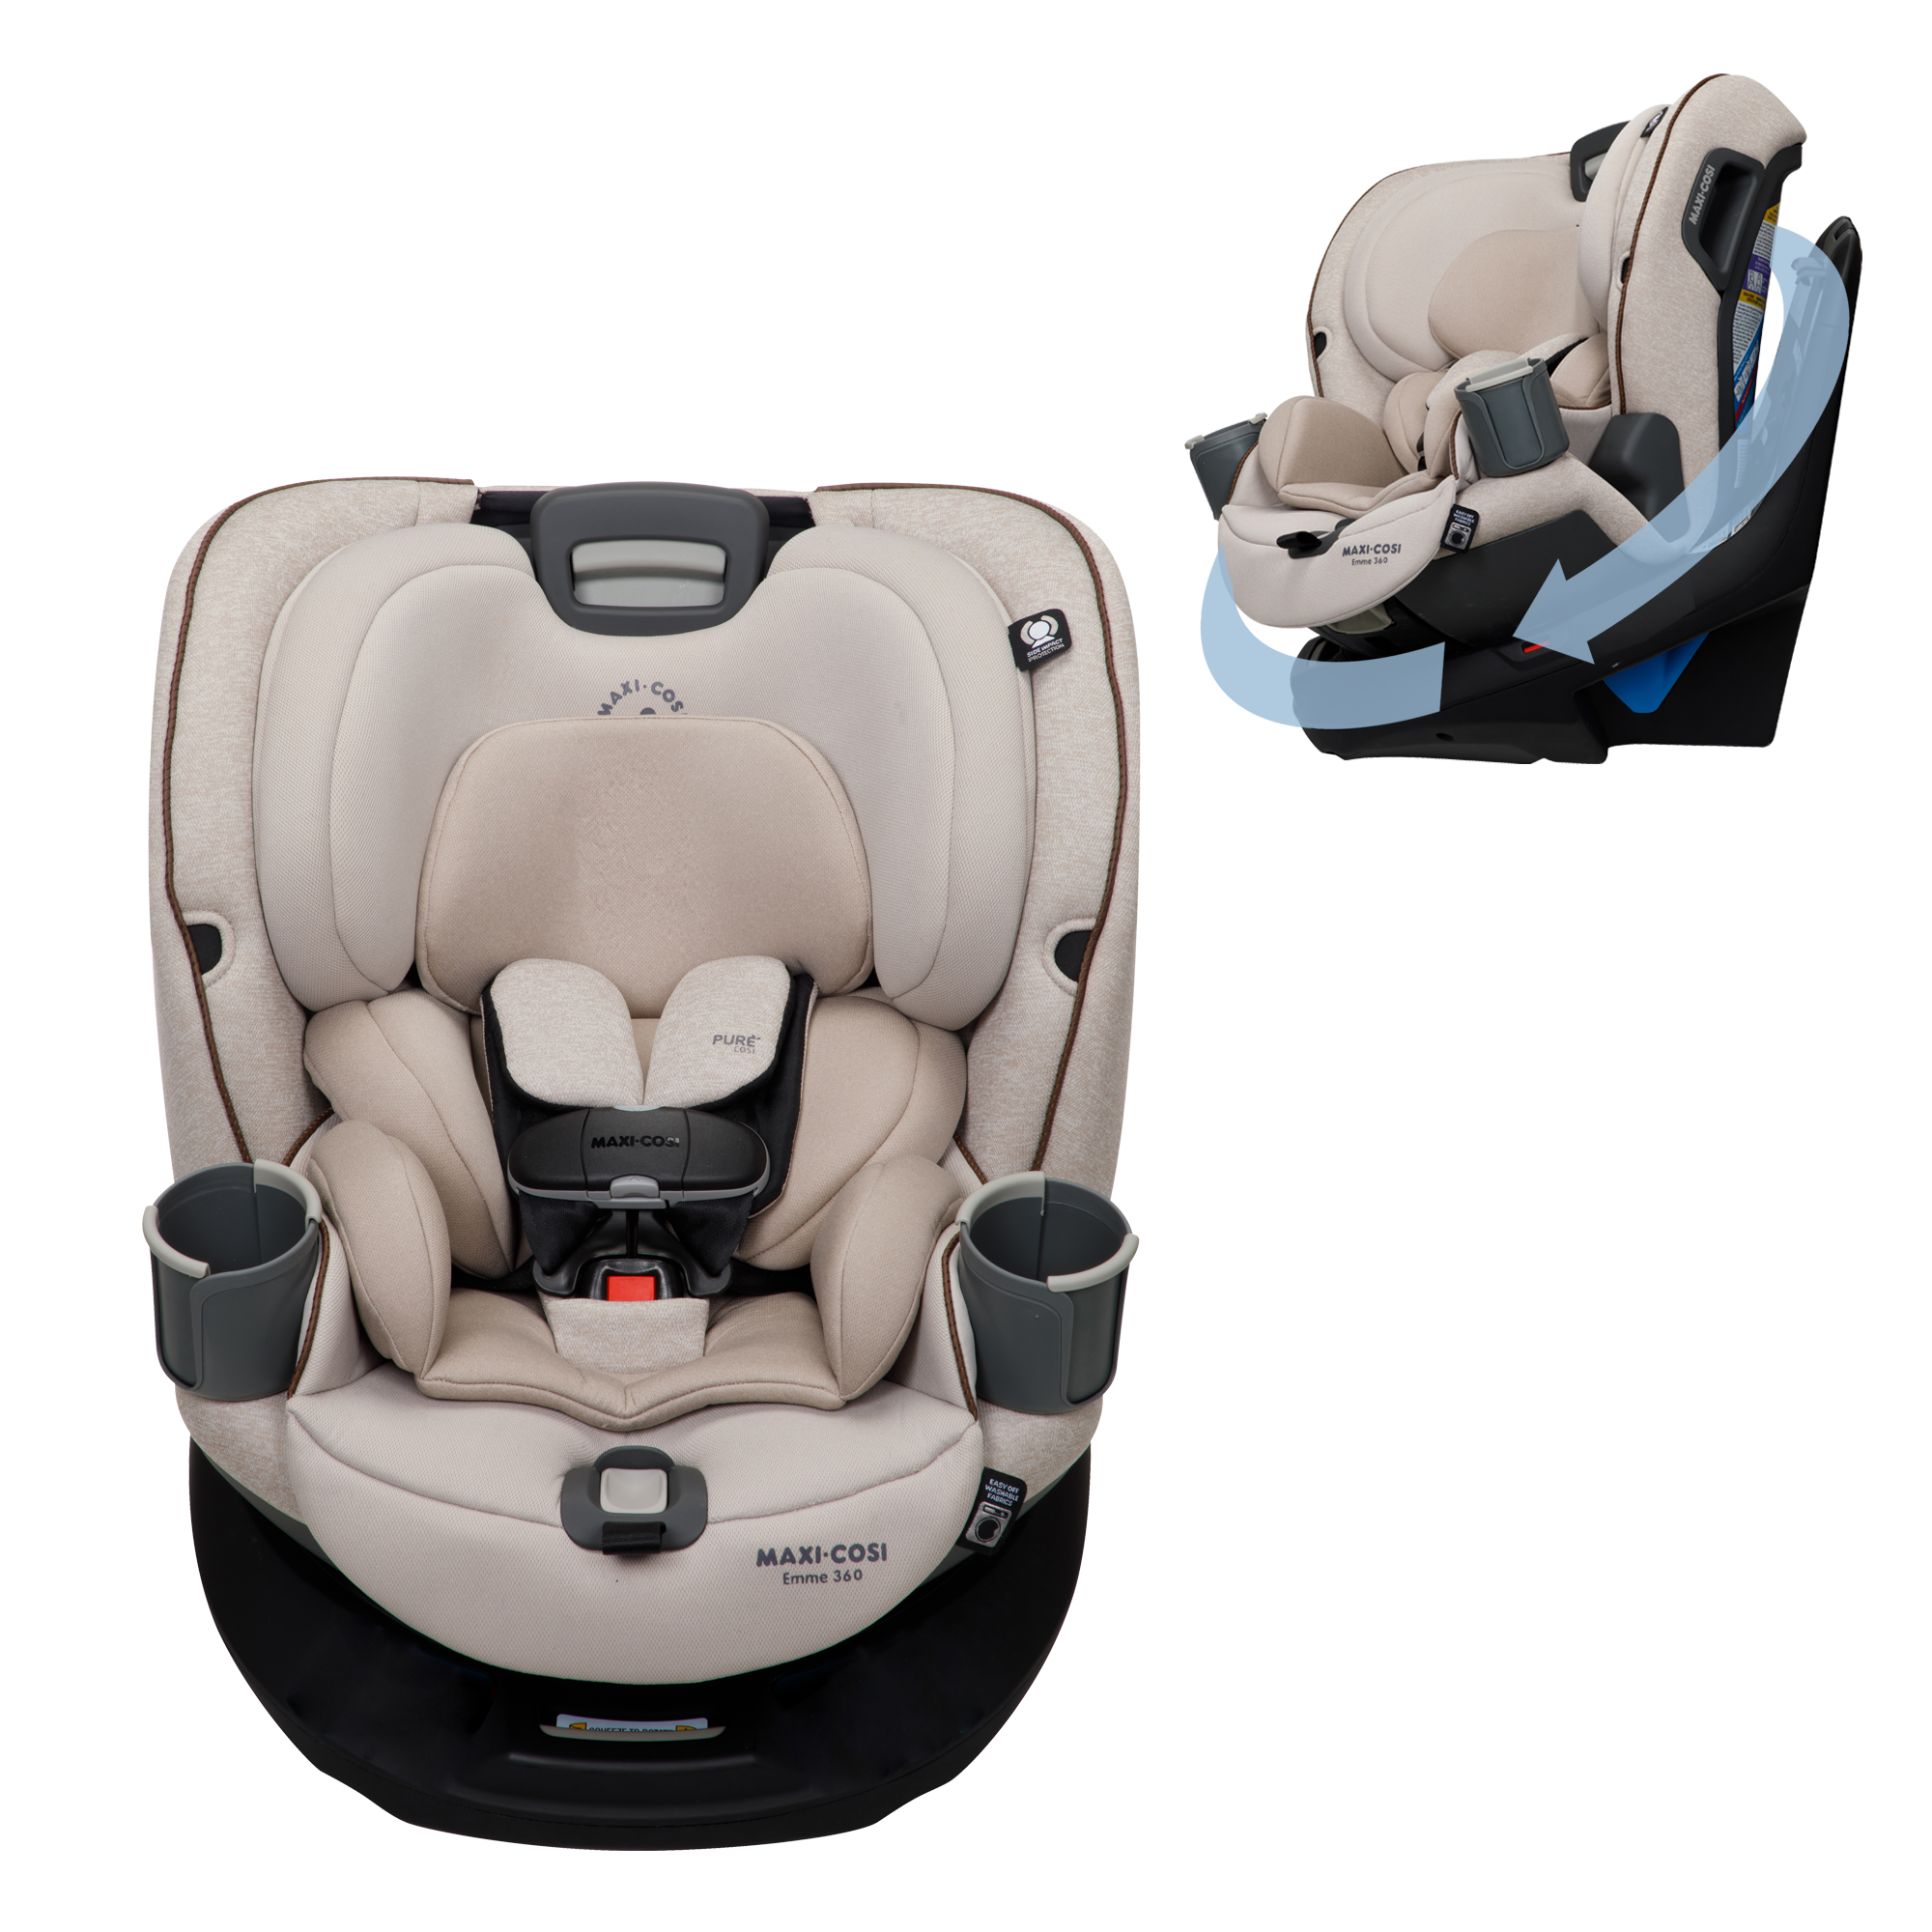 Emme 360™ Rotating All-in-One Convertible Car Seat - Desert Wonder - front view and showing rotation feature